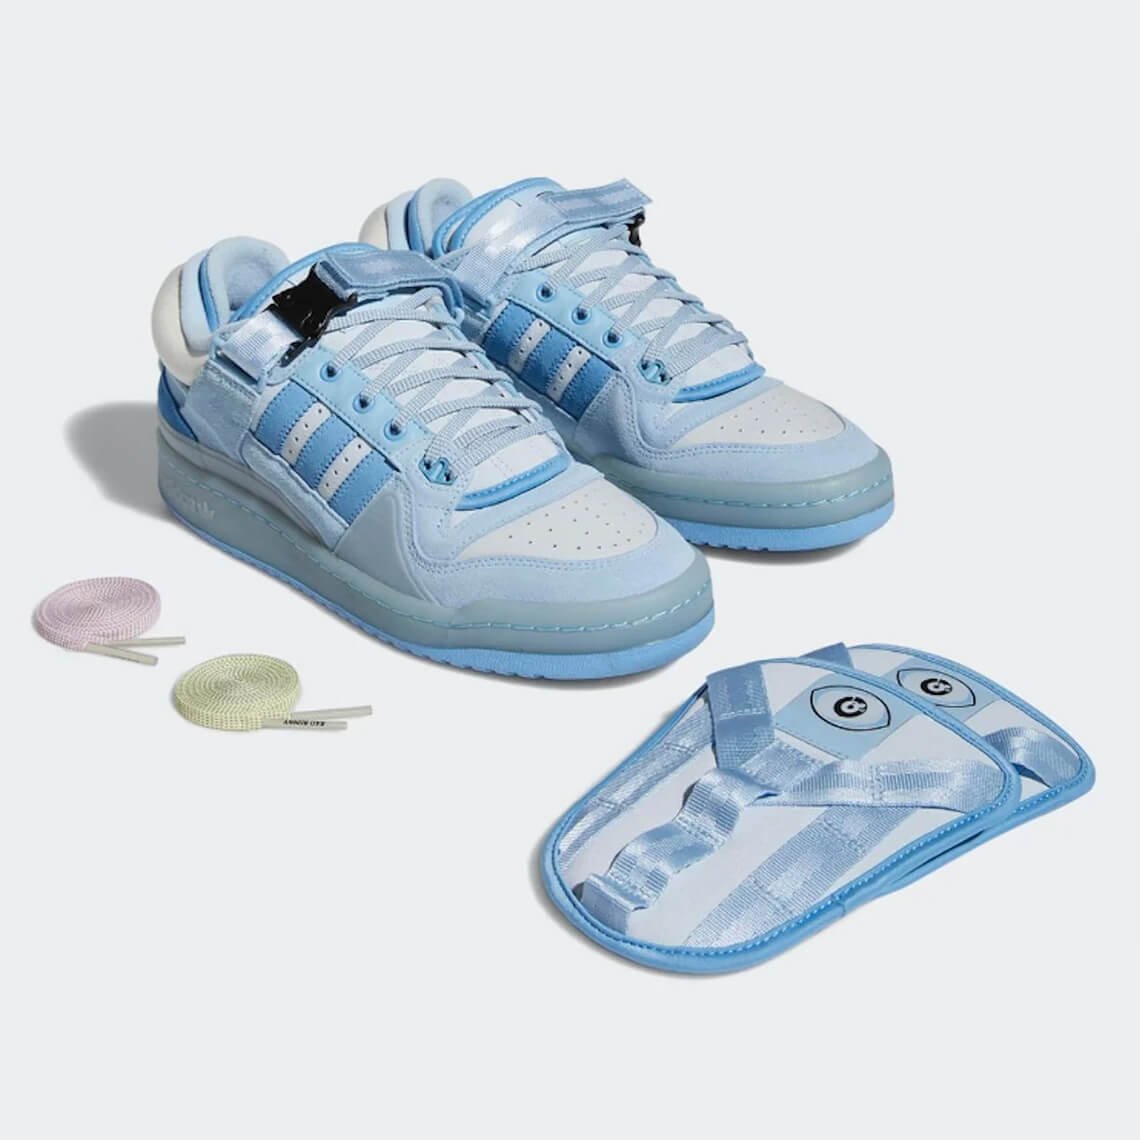 CNK-bad-bunny-adidas-forum-buckle-low-blue-tint-overview.jpeg